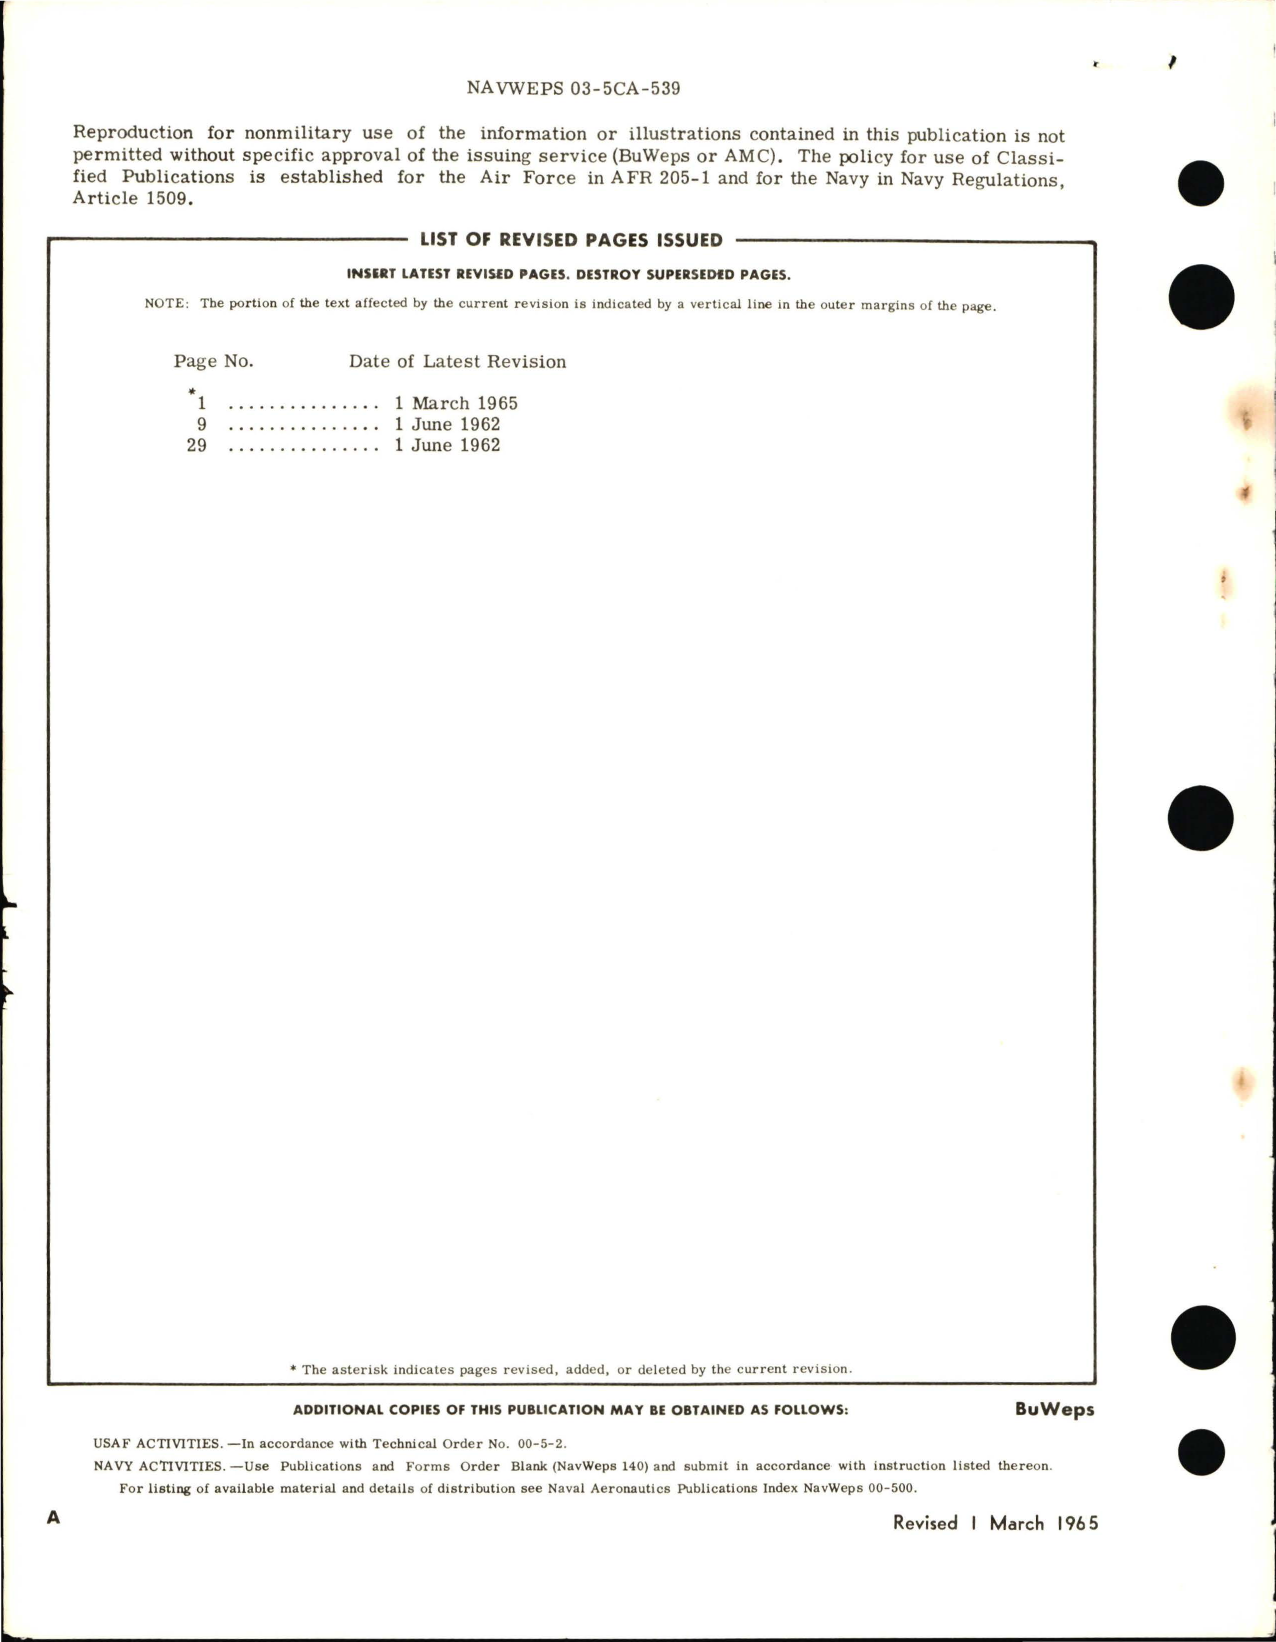 Sample page 2 from AirCorps Library document: Operation and Maintenance Instructions for Aircraft Engine Starters Type AN4116 Series